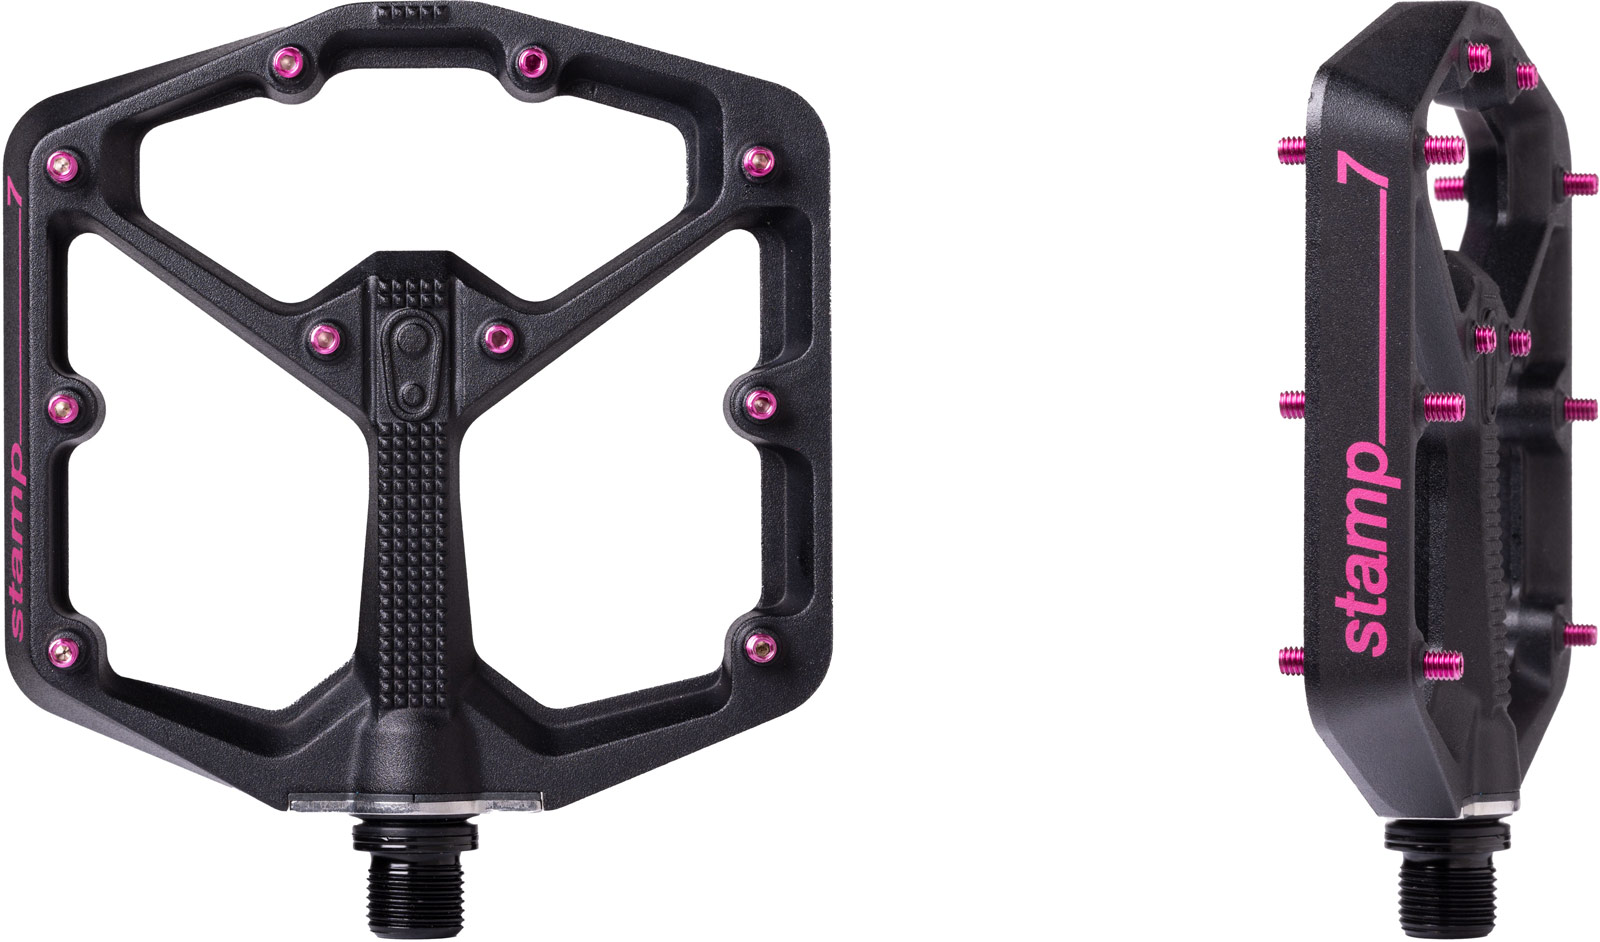 Crankbrothers x Seagrave brings Black & Pink Mallet DH and Stamp 7 Pedals -